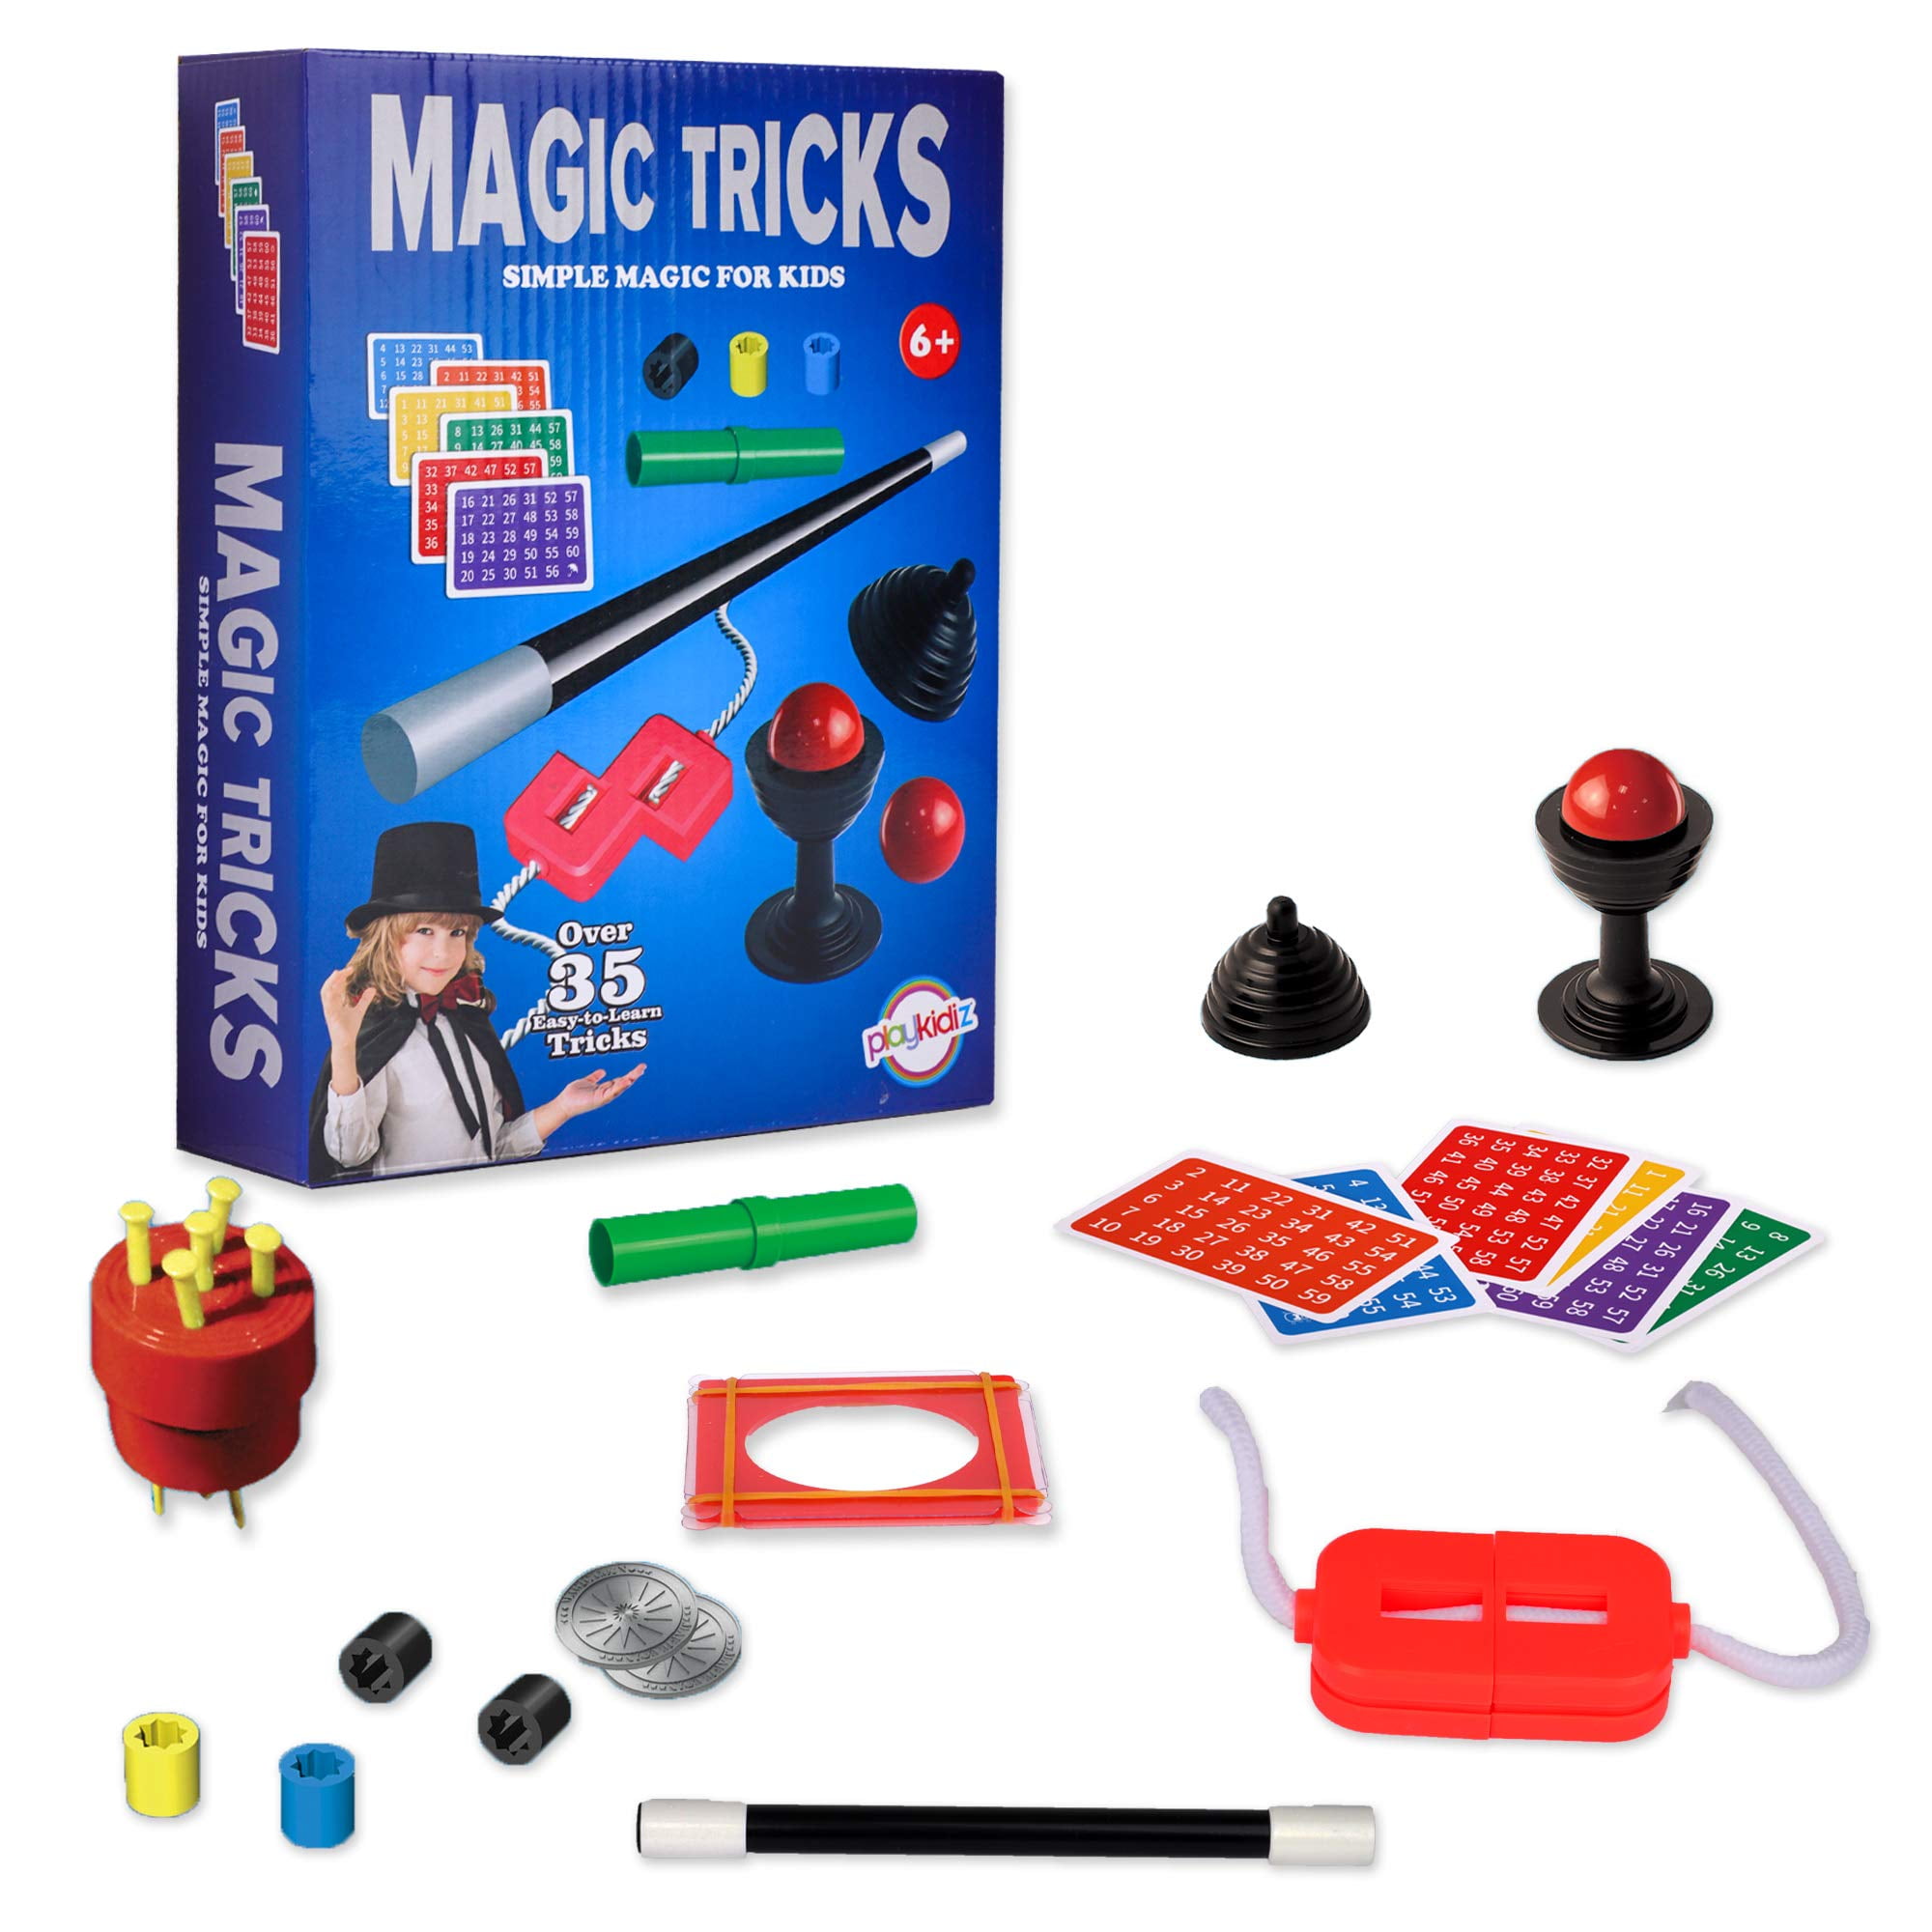 Playkidz Magic Trick for Kids Set 1 - Magic Set with Over 35 Tricks Made  Simple, Magician Pretend Play Set with Wand & More Magic Tricks - Easy to  Learn Instruction Manual 